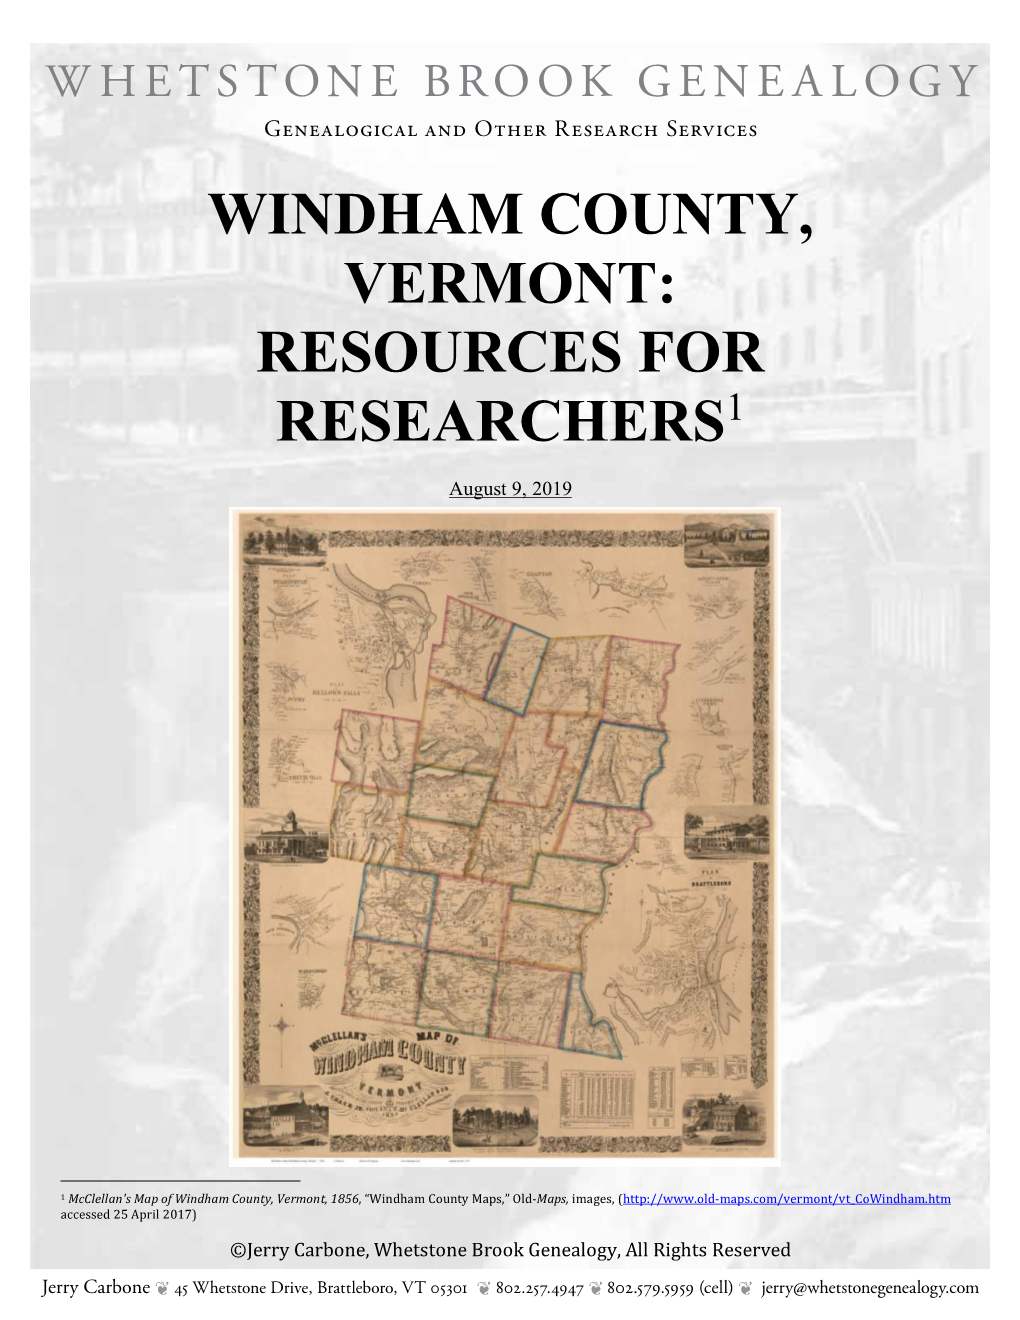 Windham County, Vermont: Resources for Researchers1